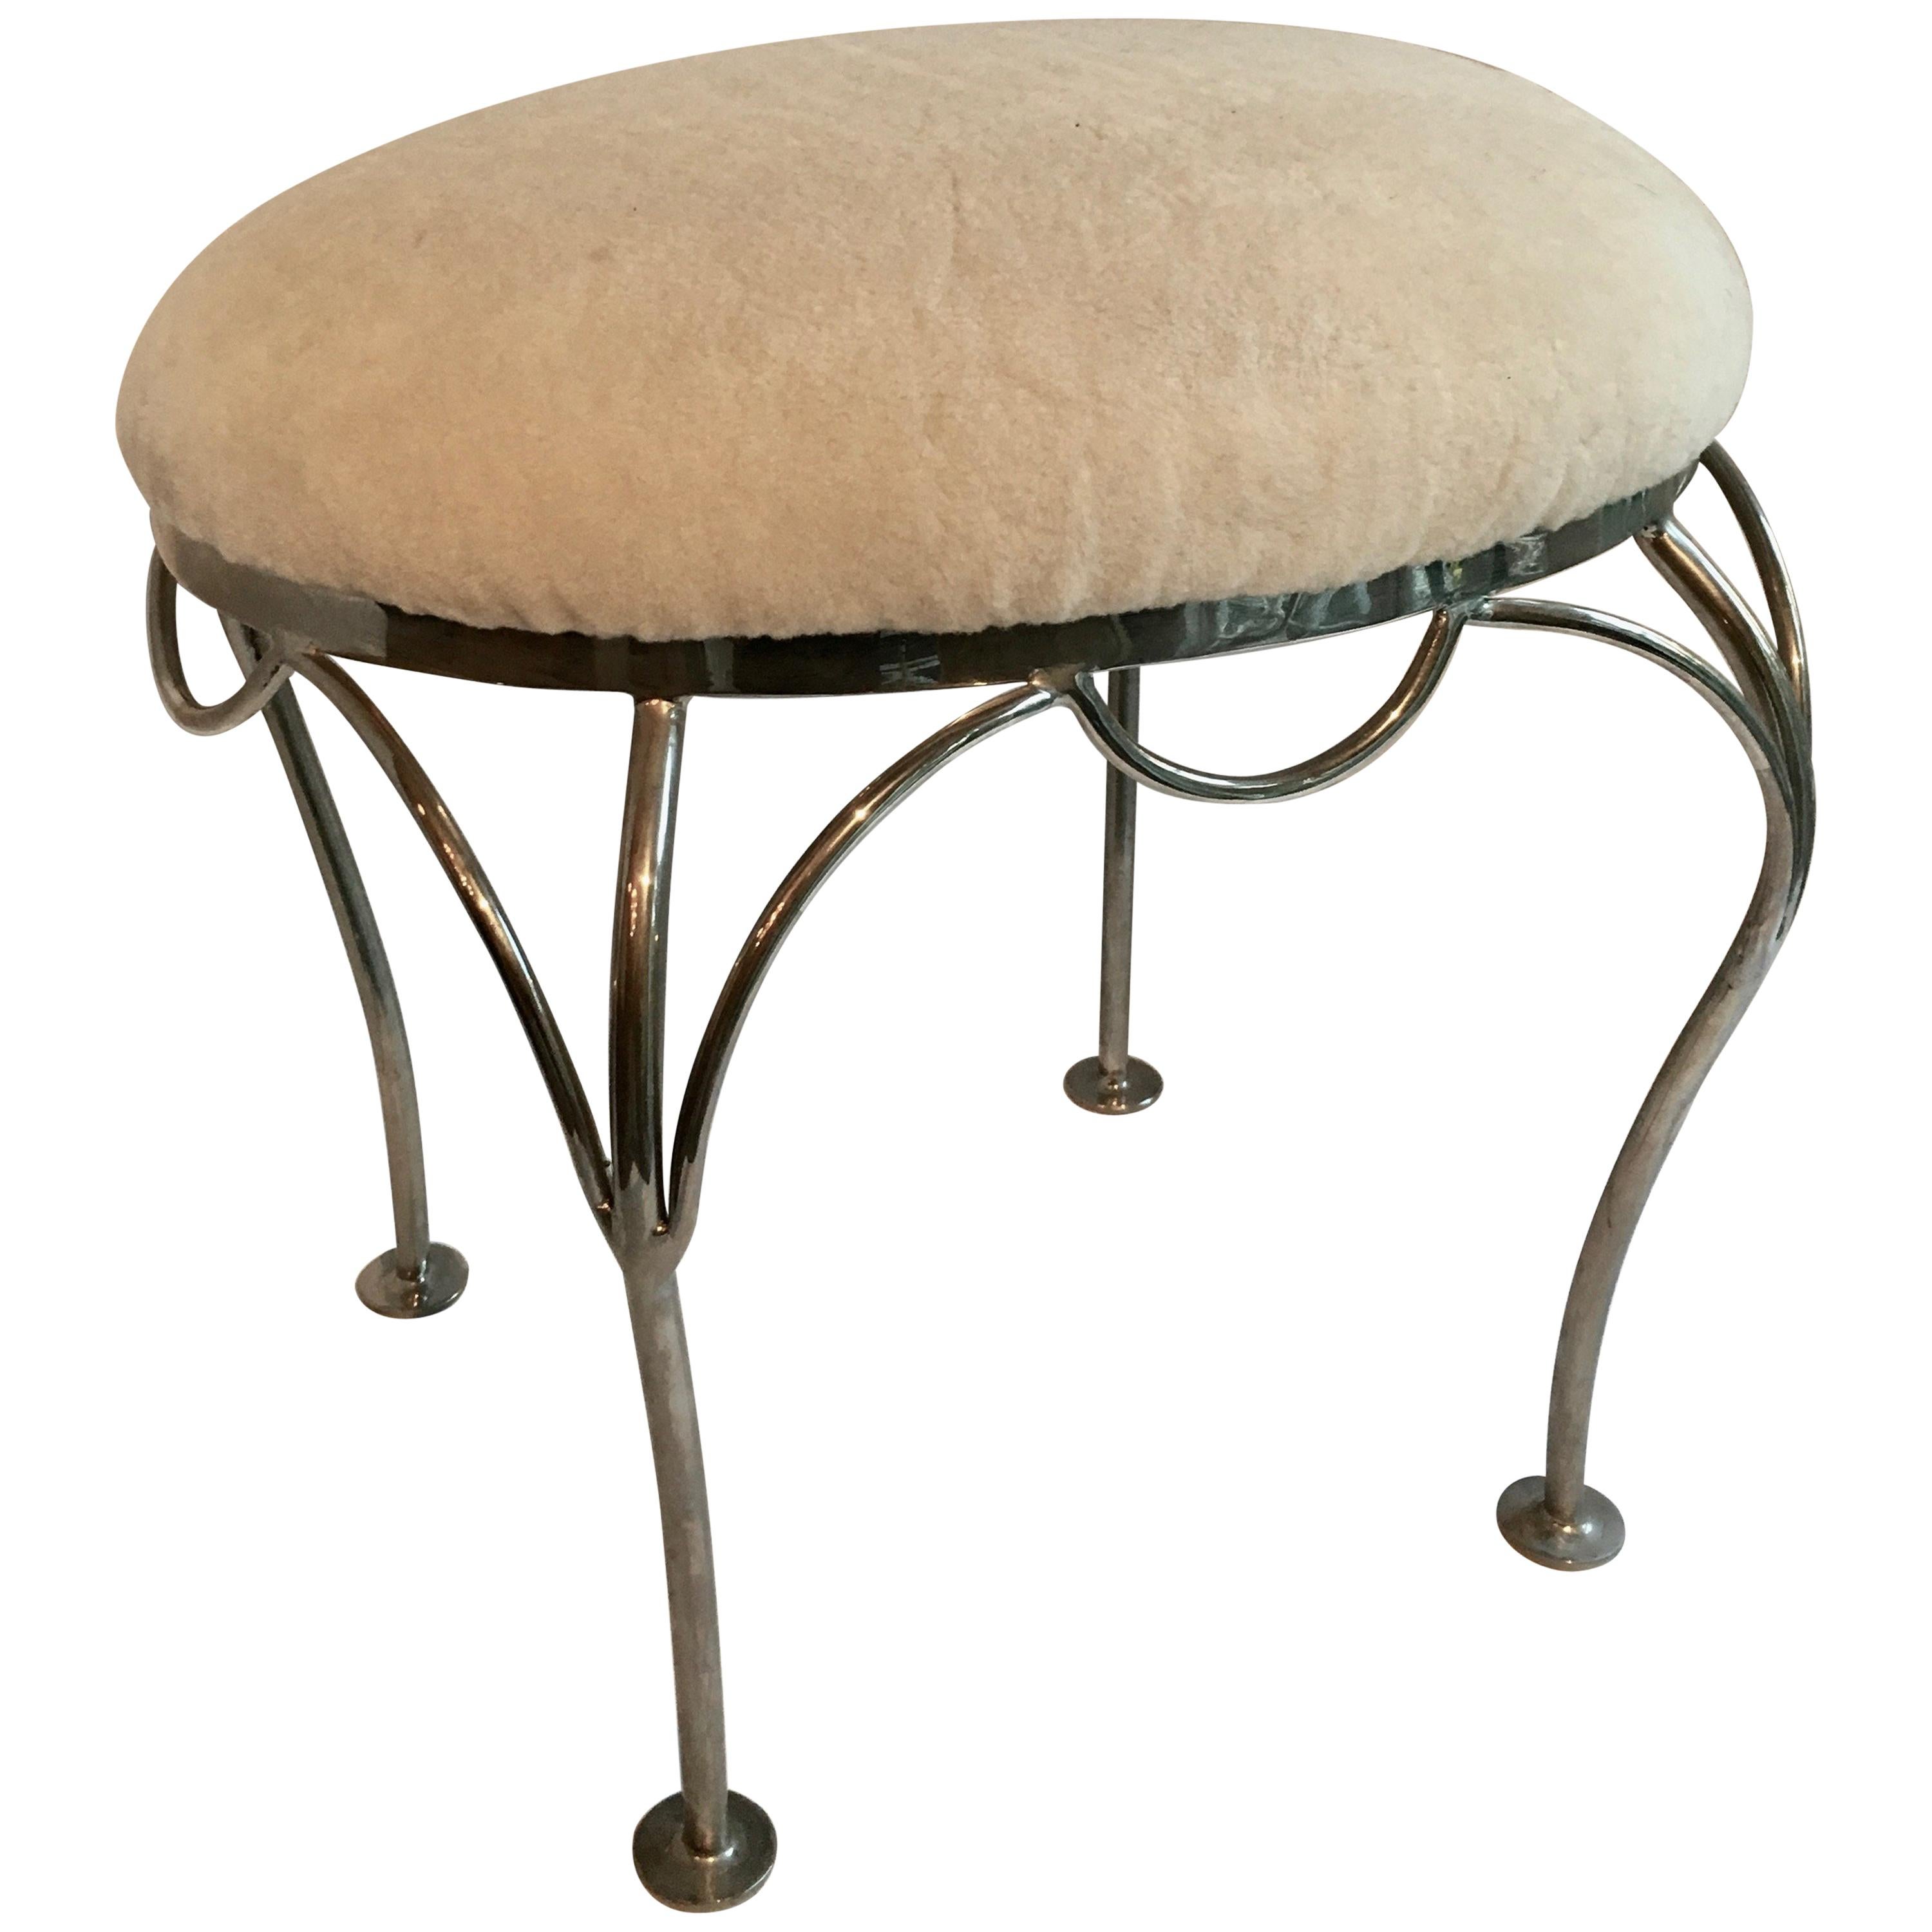 Nickel-Plated Vanity Stool with Shearling Seat